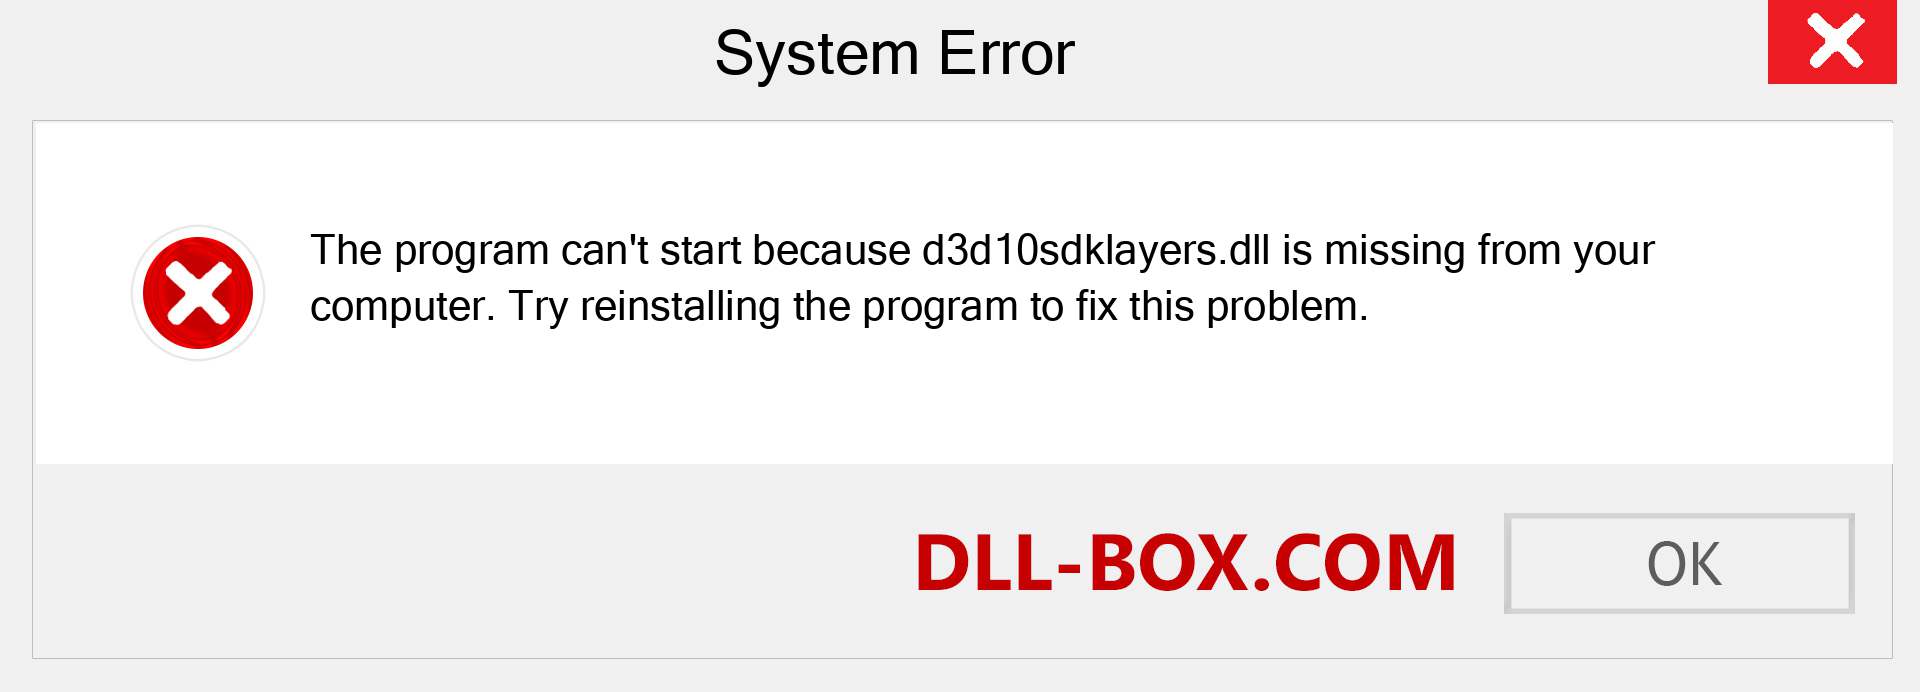  d3d10sdklayers.dll file is missing?. Download for Windows 7, 8, 10 - Fix  d3d10sdklayers dll Missing Error on Windows, photos, images